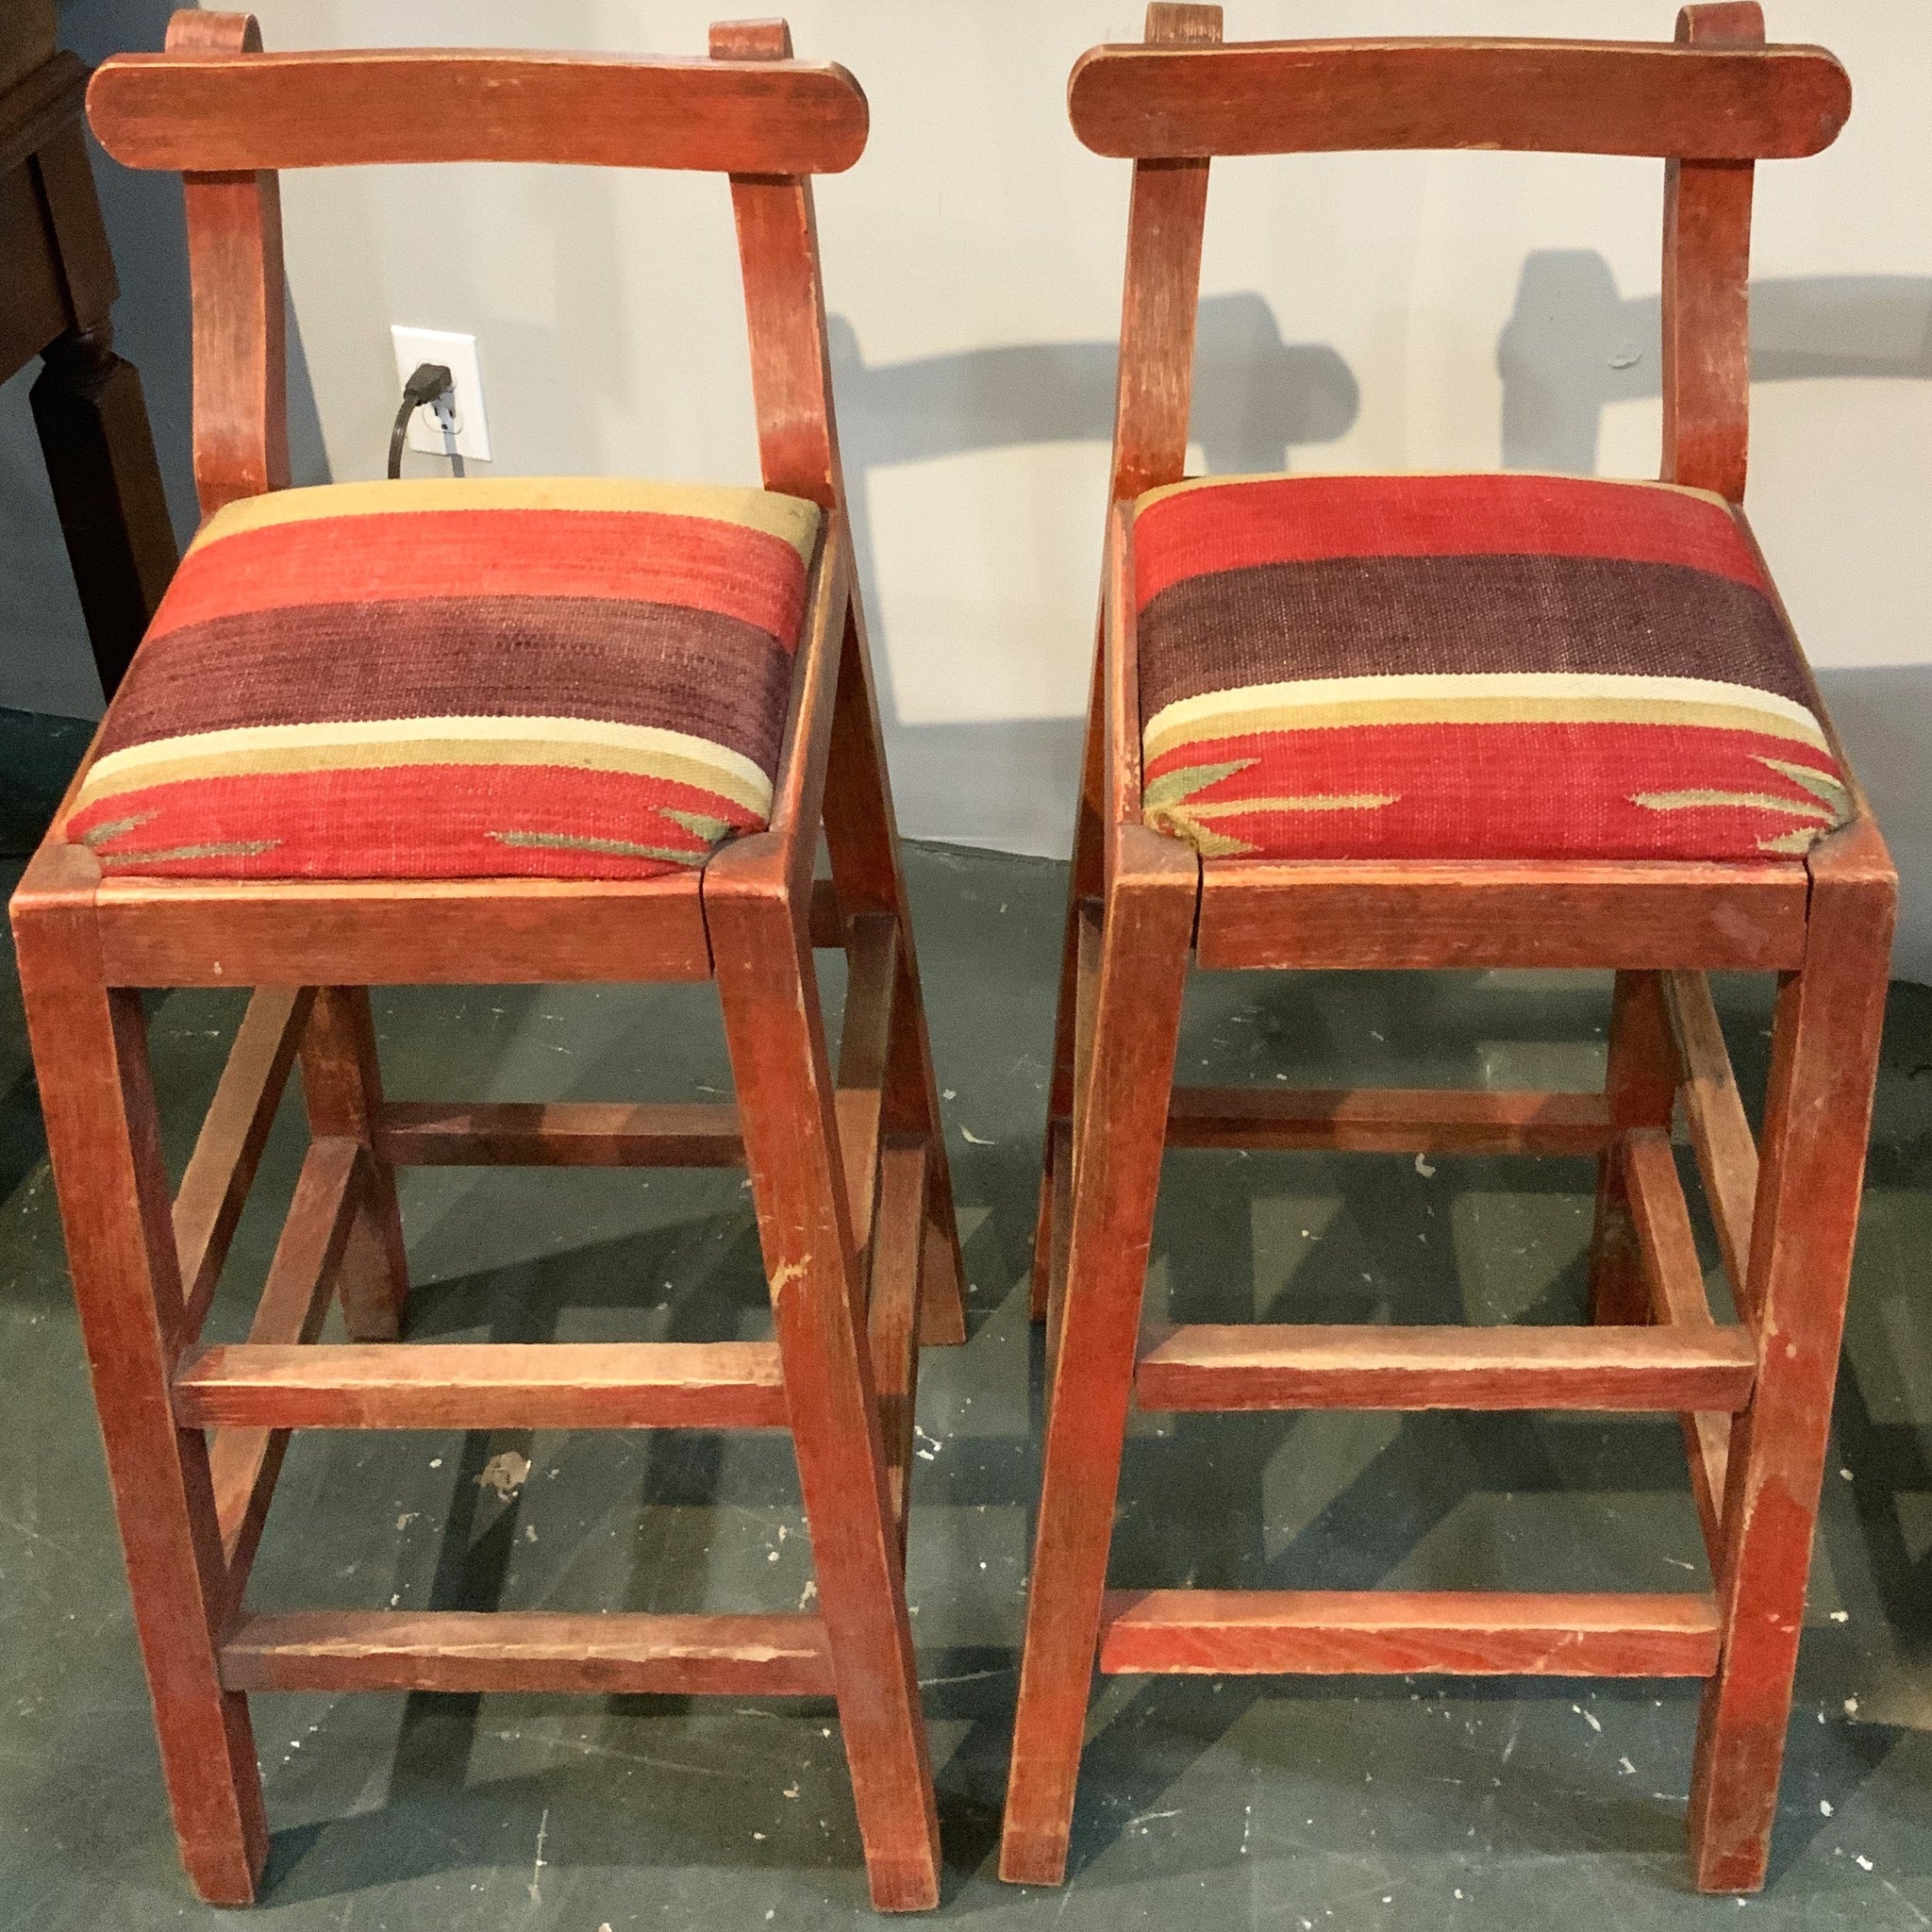 Pair of Small  Rustic Wood Barstools with Stripe Upholstery